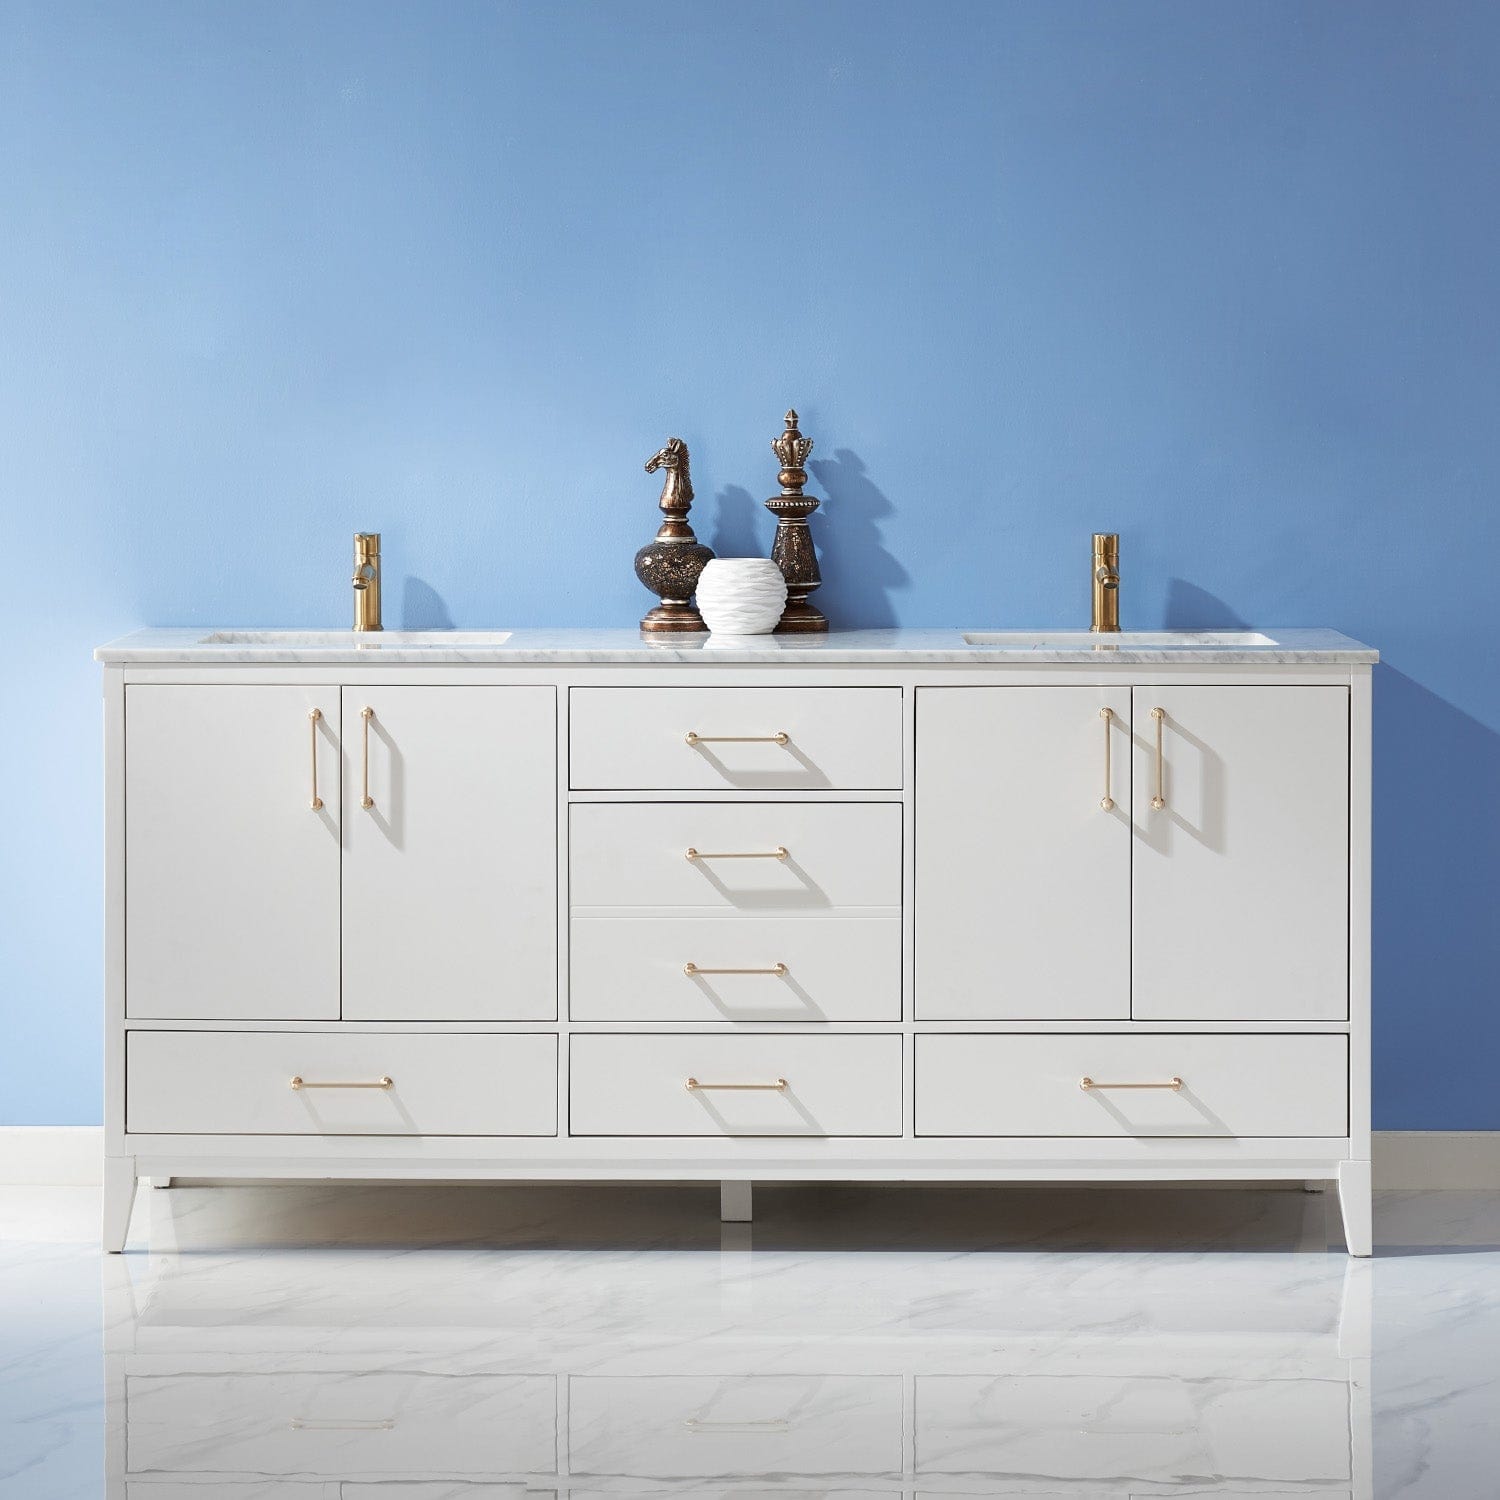 Altair Sutton 72" Double Bathroom Vanity Set in White and Carrara White Marble Countertop without Mirror 541072-WH-CA-NM - Molaix631112972048Vanity541072-WH-CA-NM